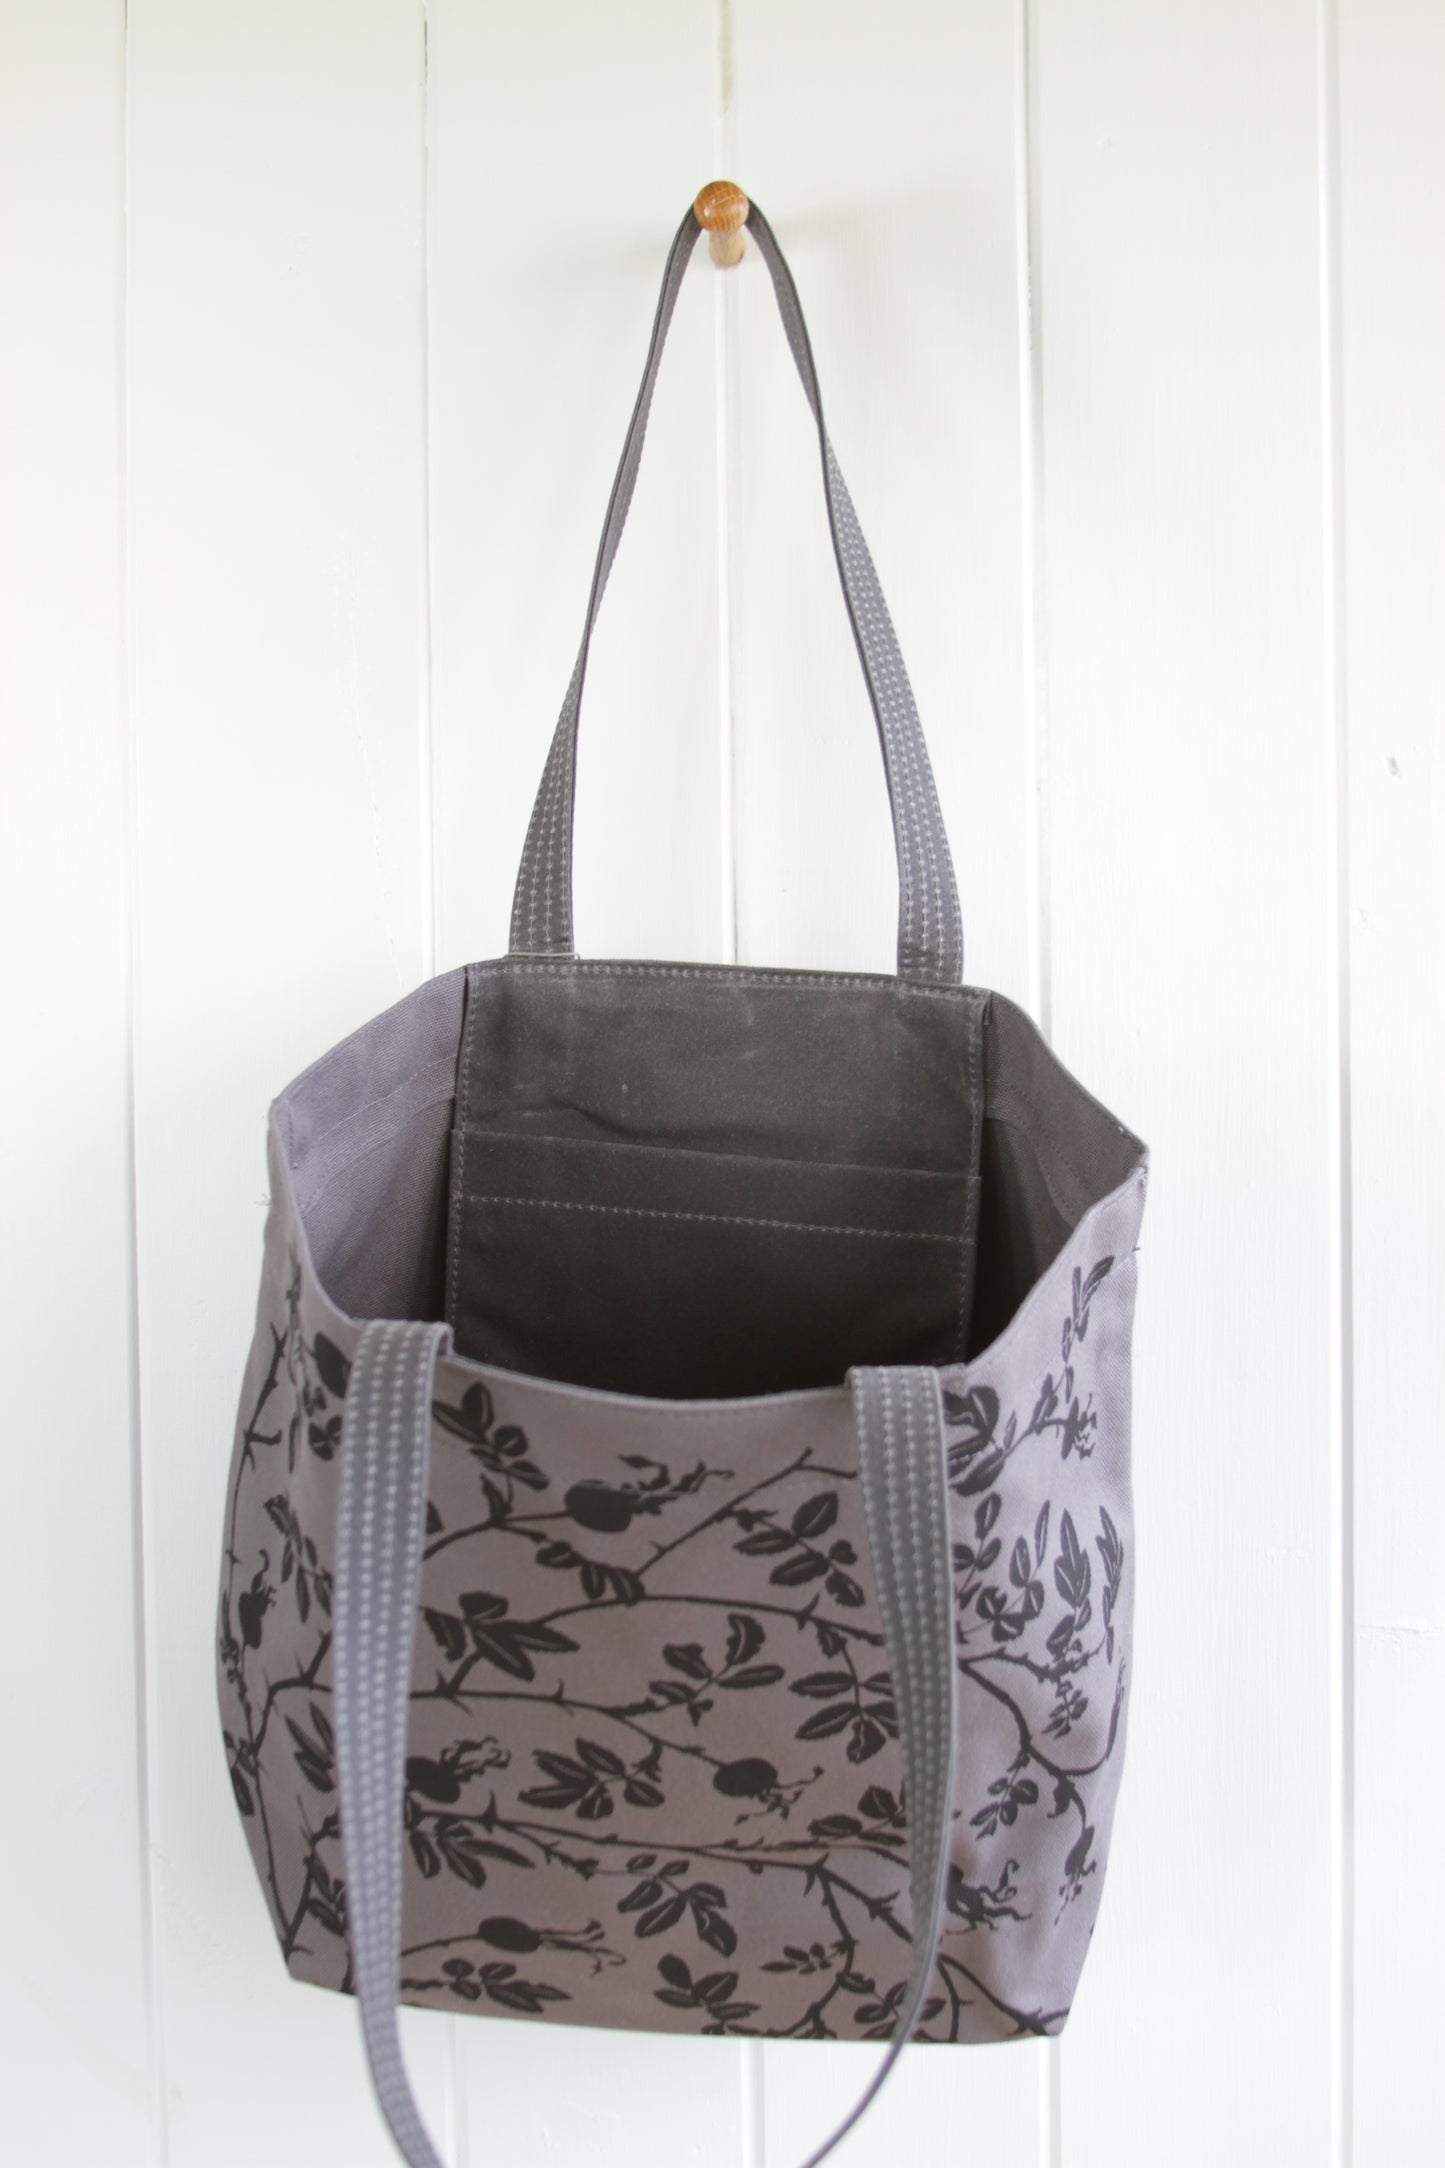 Sturdy Tote - Nootka in Charcoal on Grey